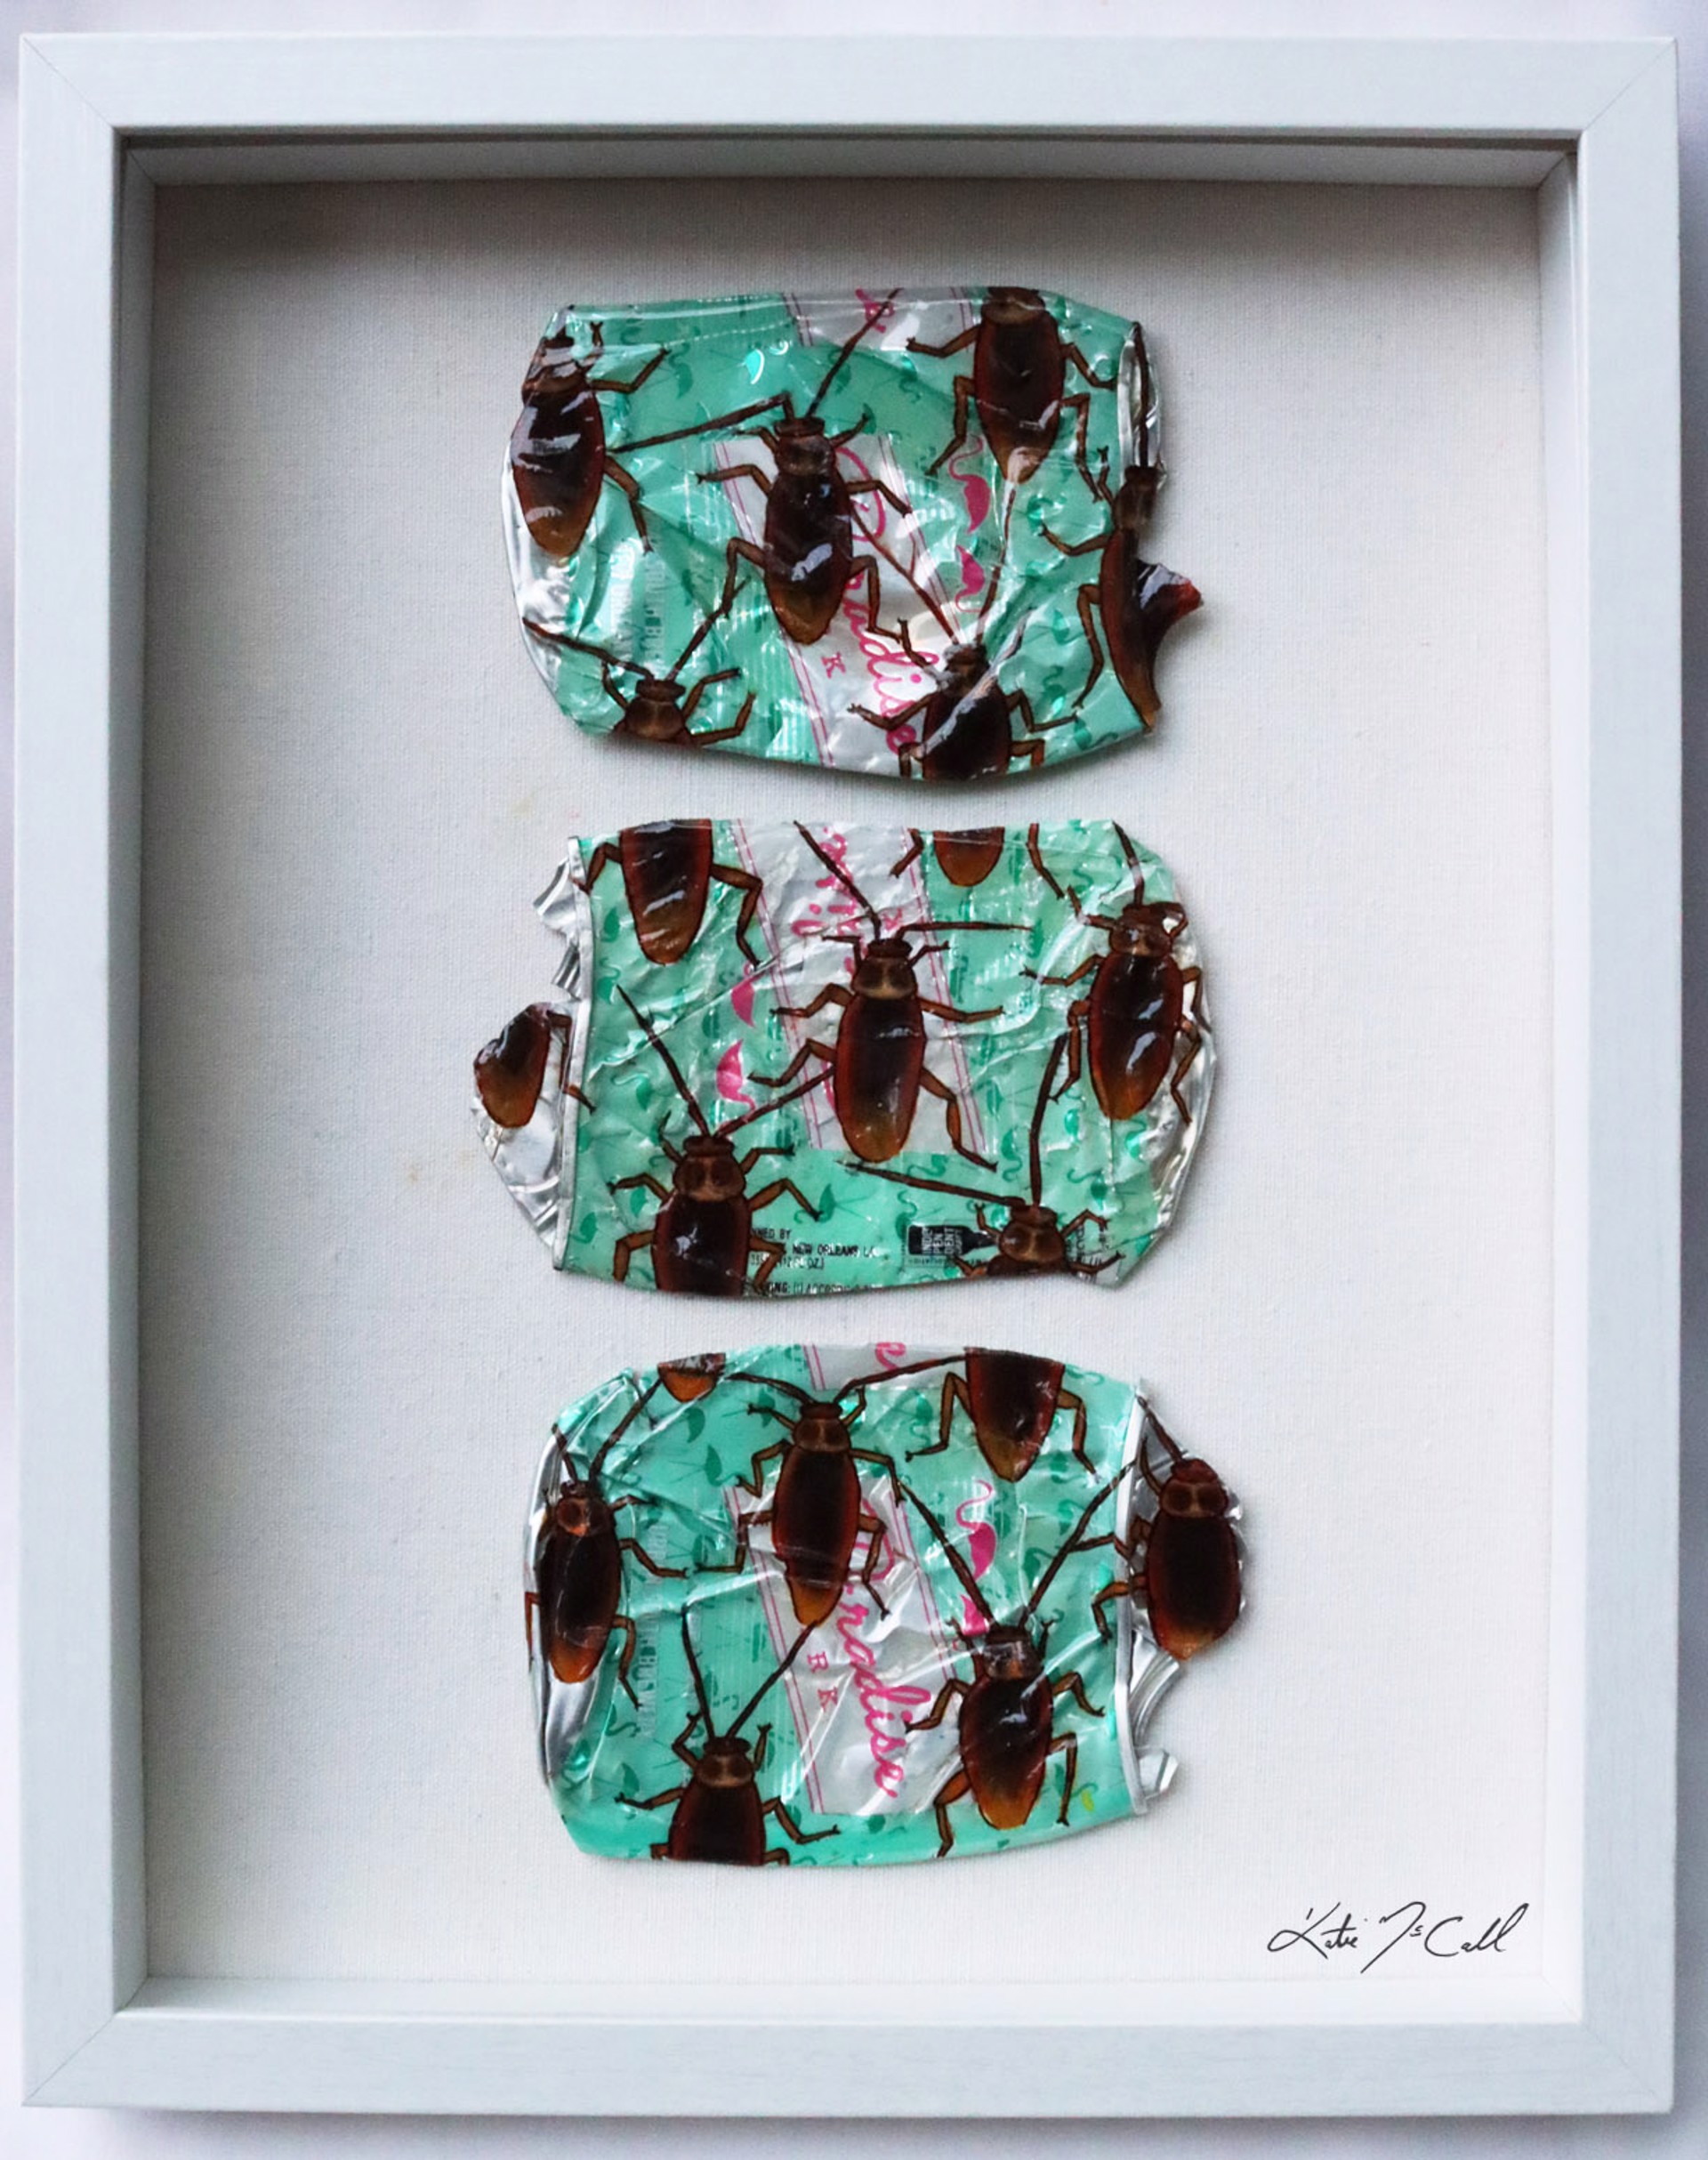 Cockroach Triptych by Katie McCall